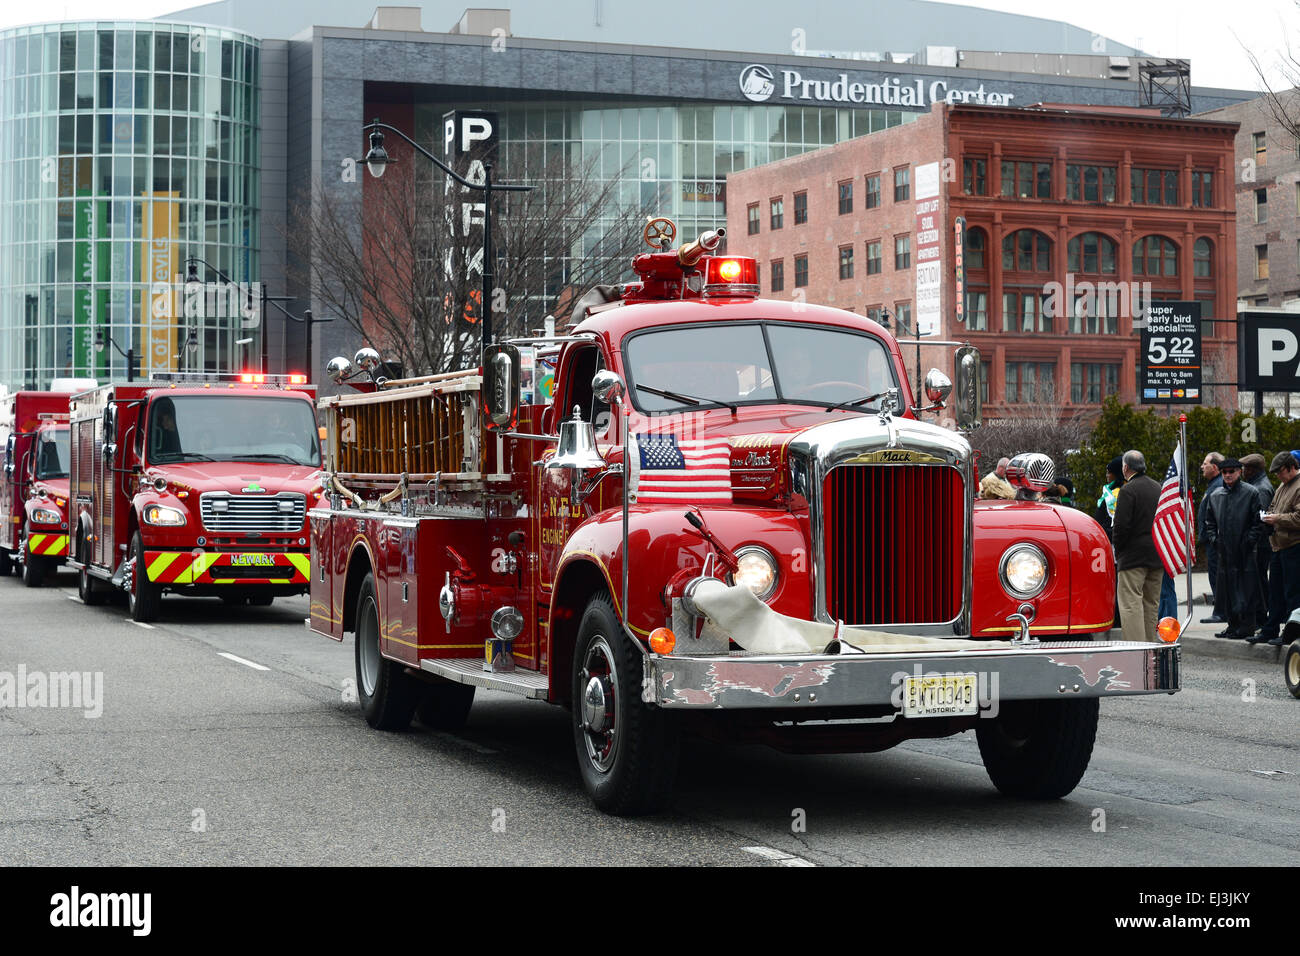 Newark Fire Department truck parading during the 2013 St. Patrick's Day parade. Newark, New Jersey. USA. Stock Photo